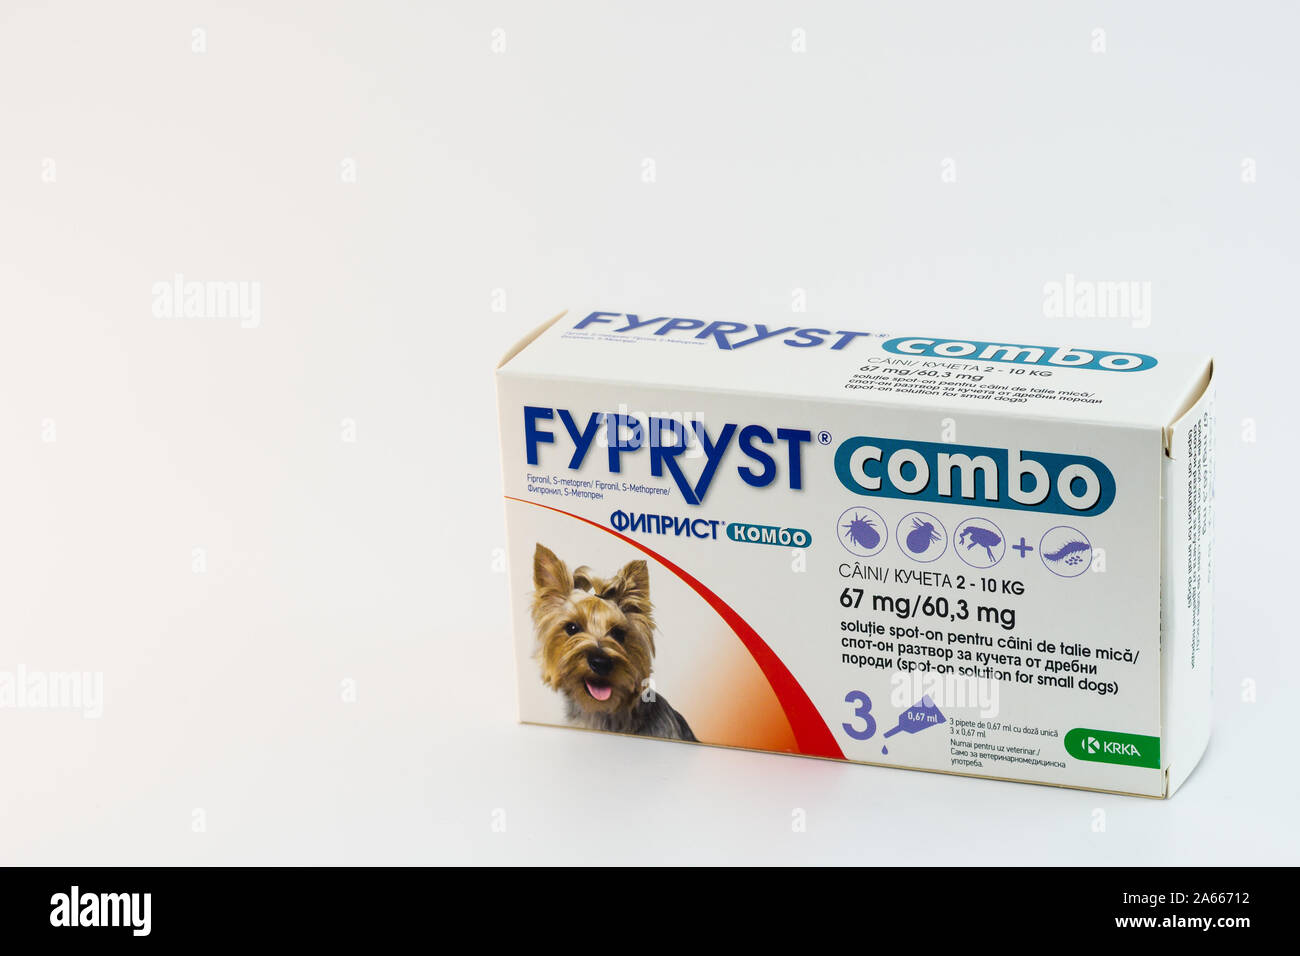 Cluj-Napoca/Romania-10 24 2019: Fypryst combo spot-on solution for small dogs Stock Photo